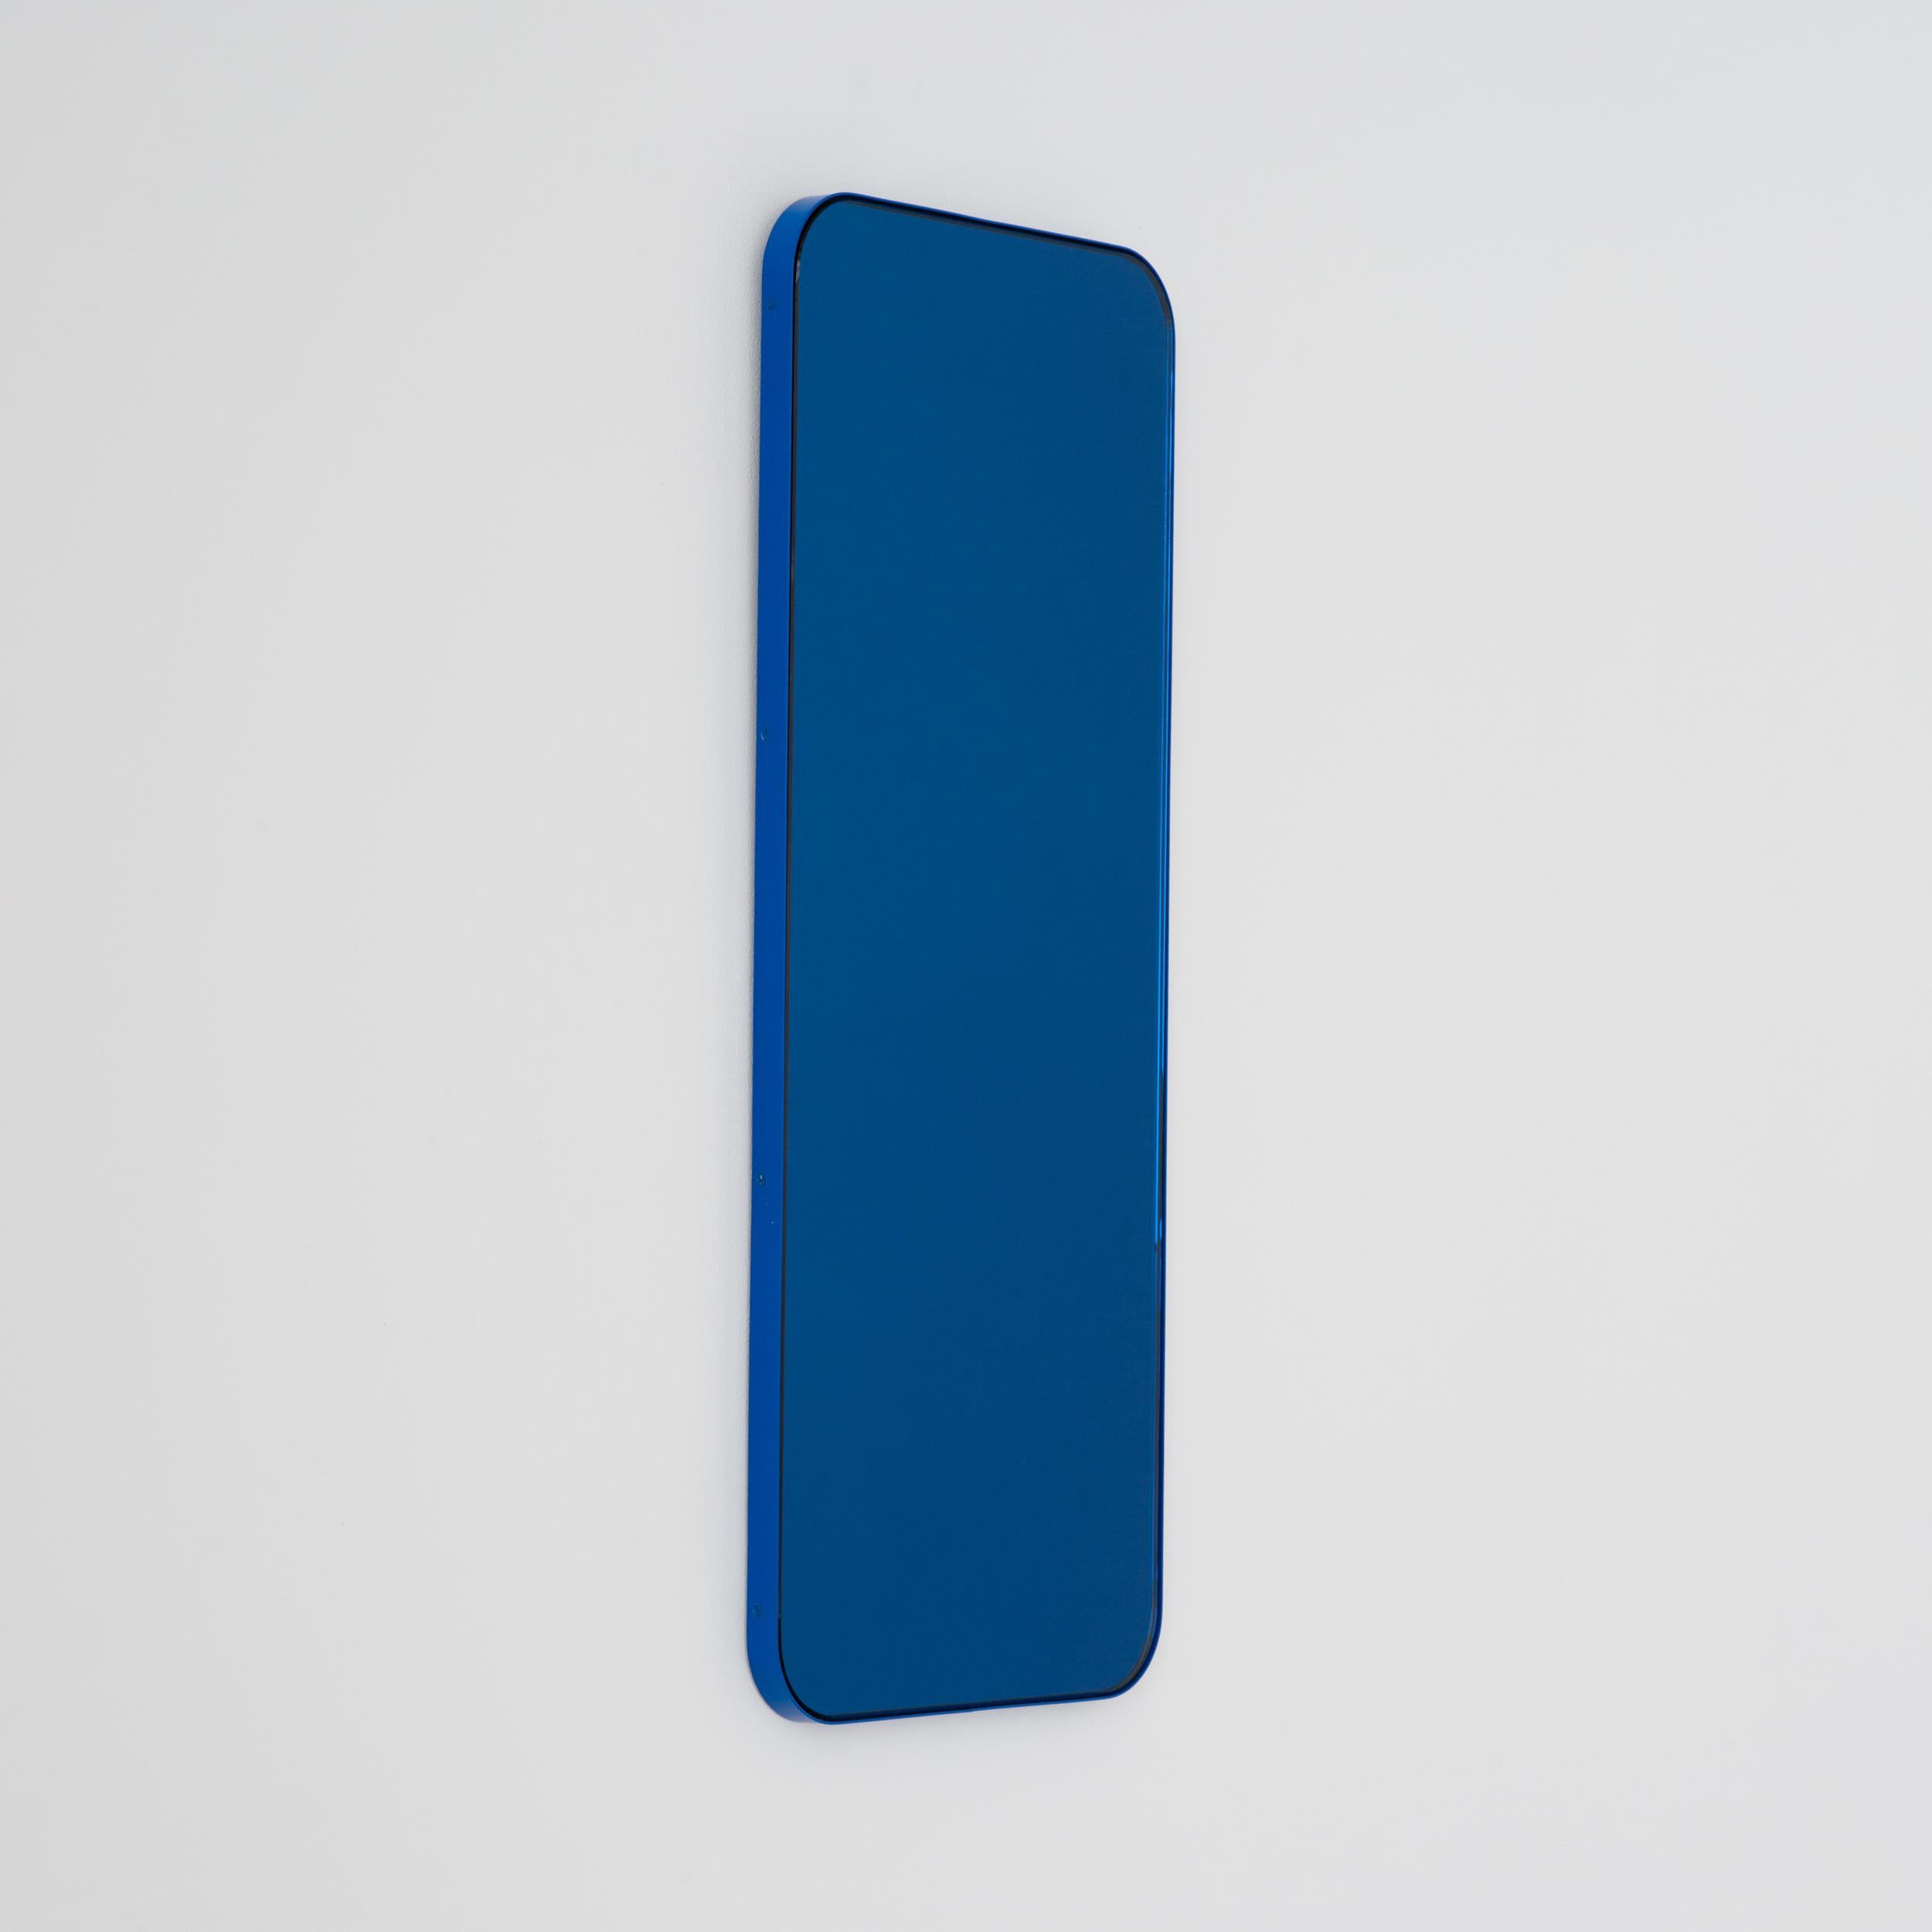 Quadris Rectangular Contemporary Blue Tinted Mirror with a Blue Frame, Small For Sale 2